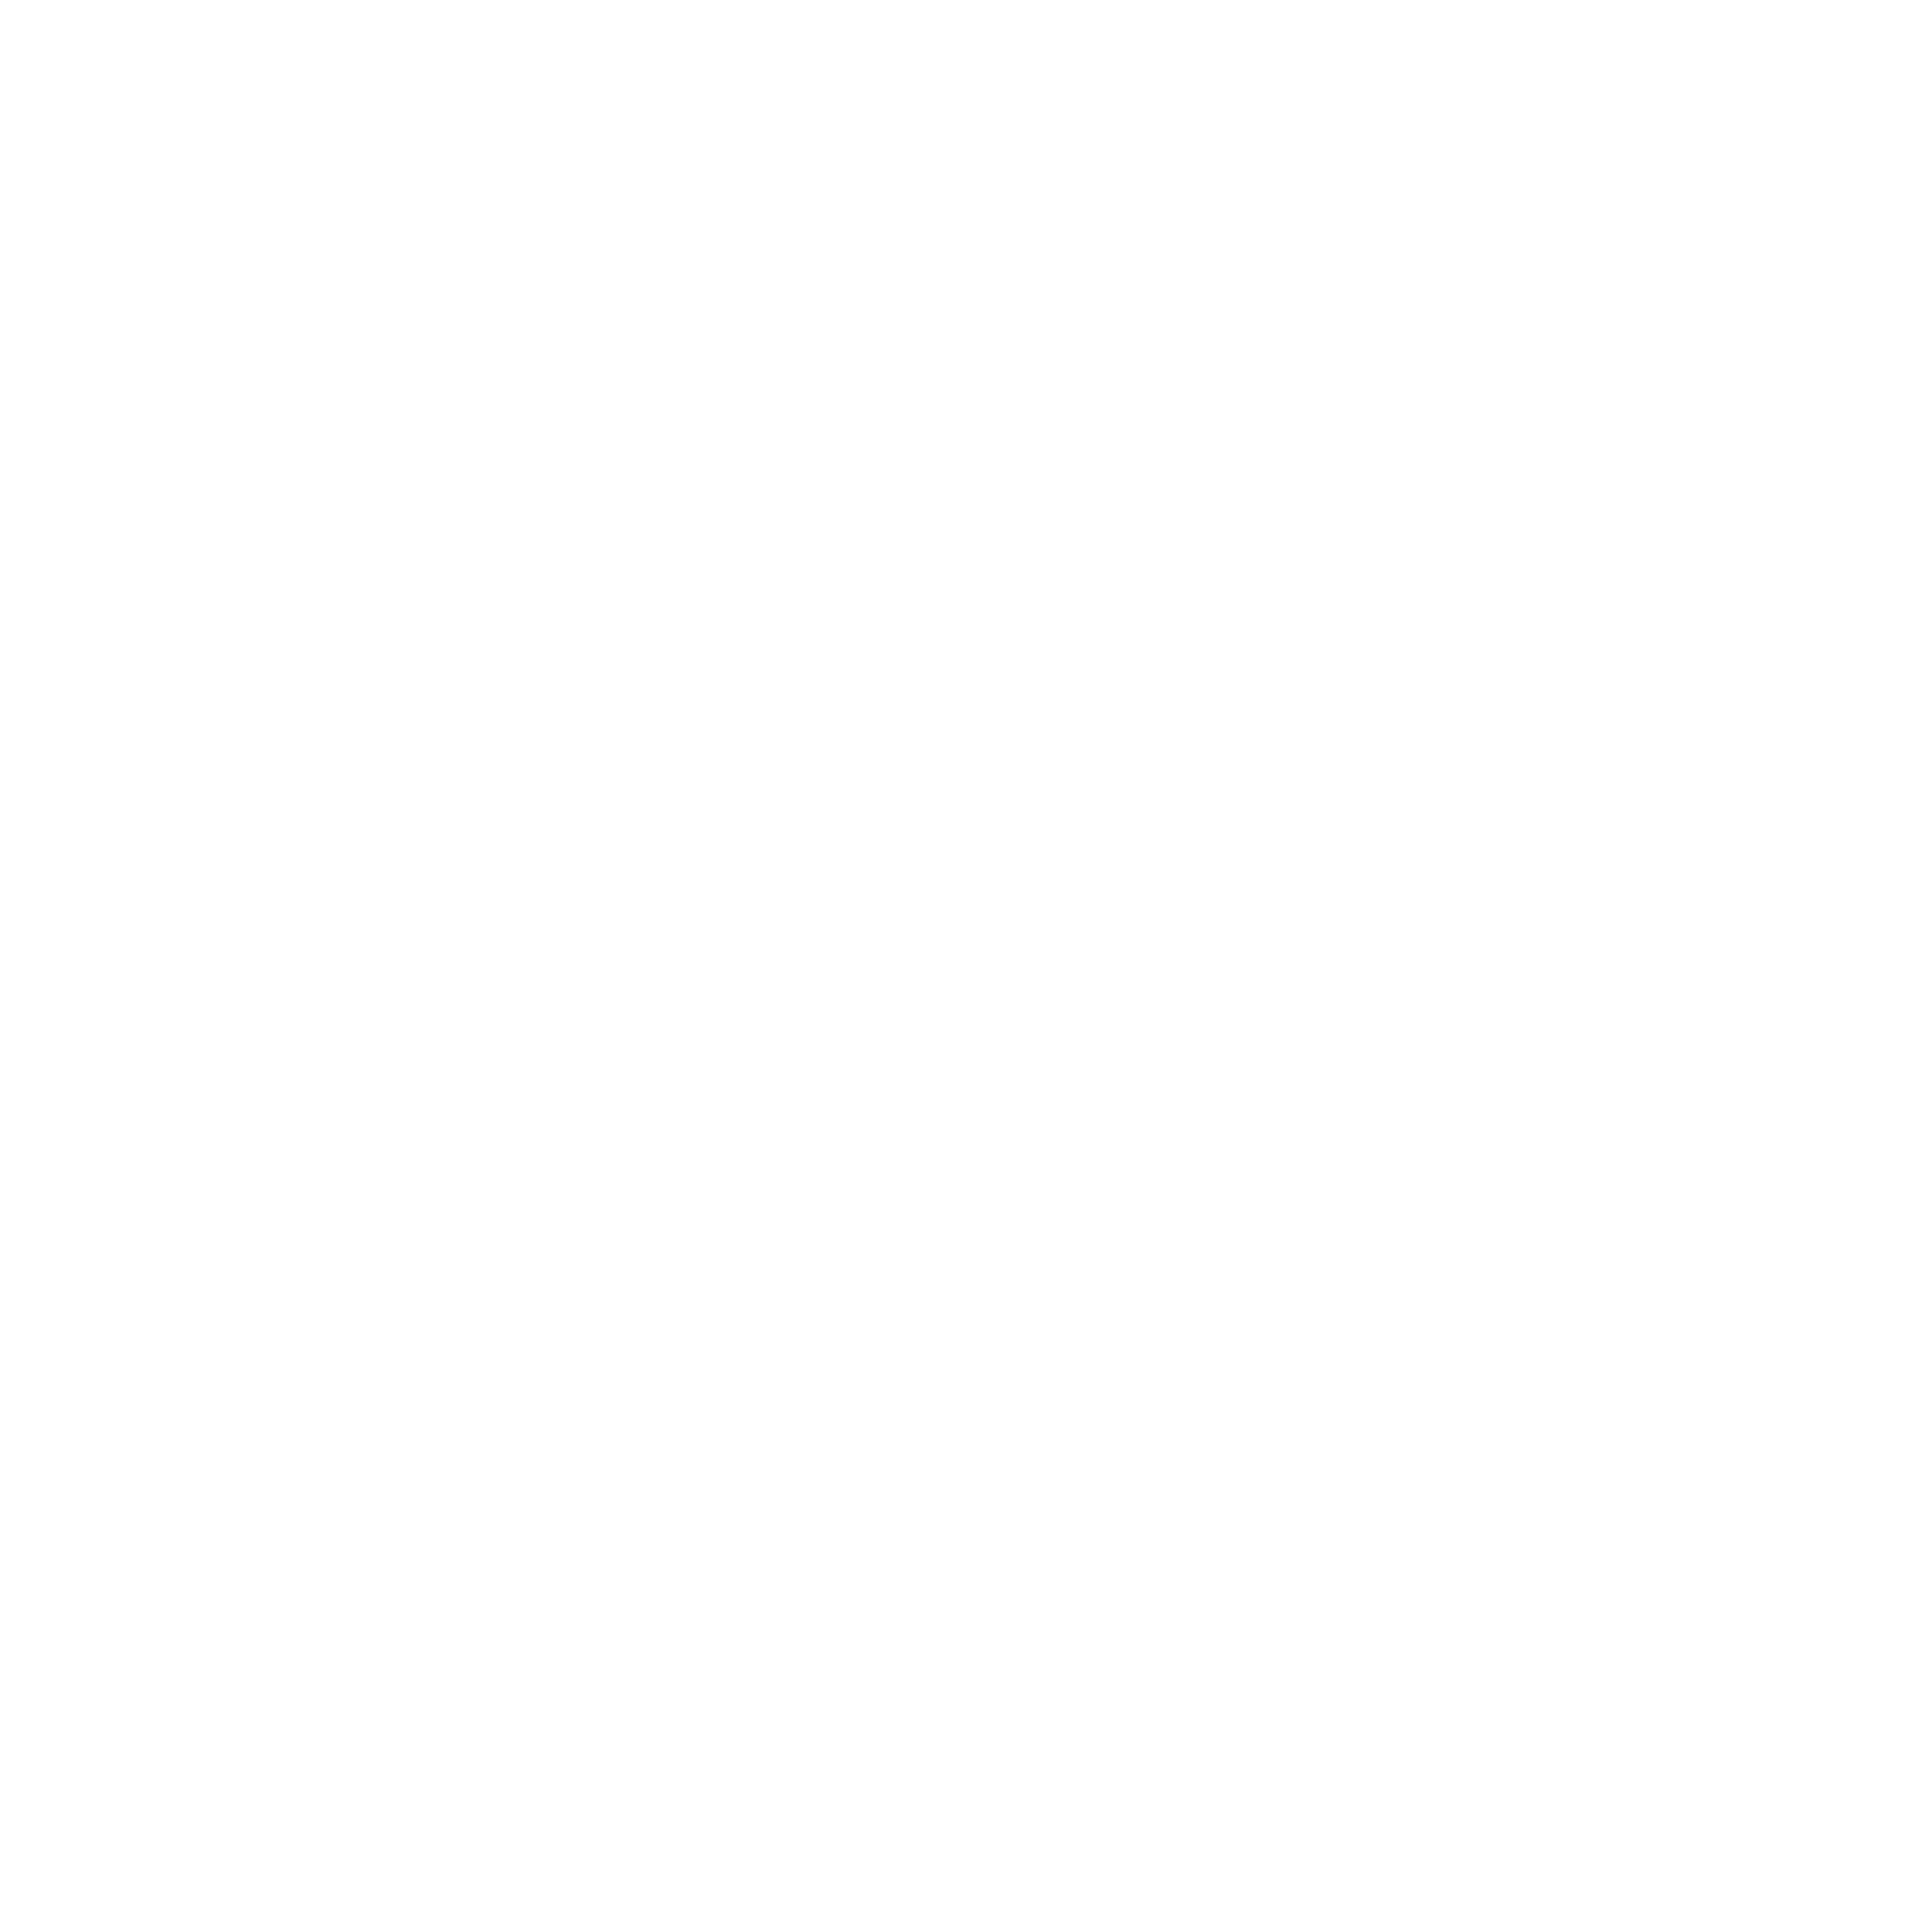 ACI | Icon showing two hands grabbing a leaf